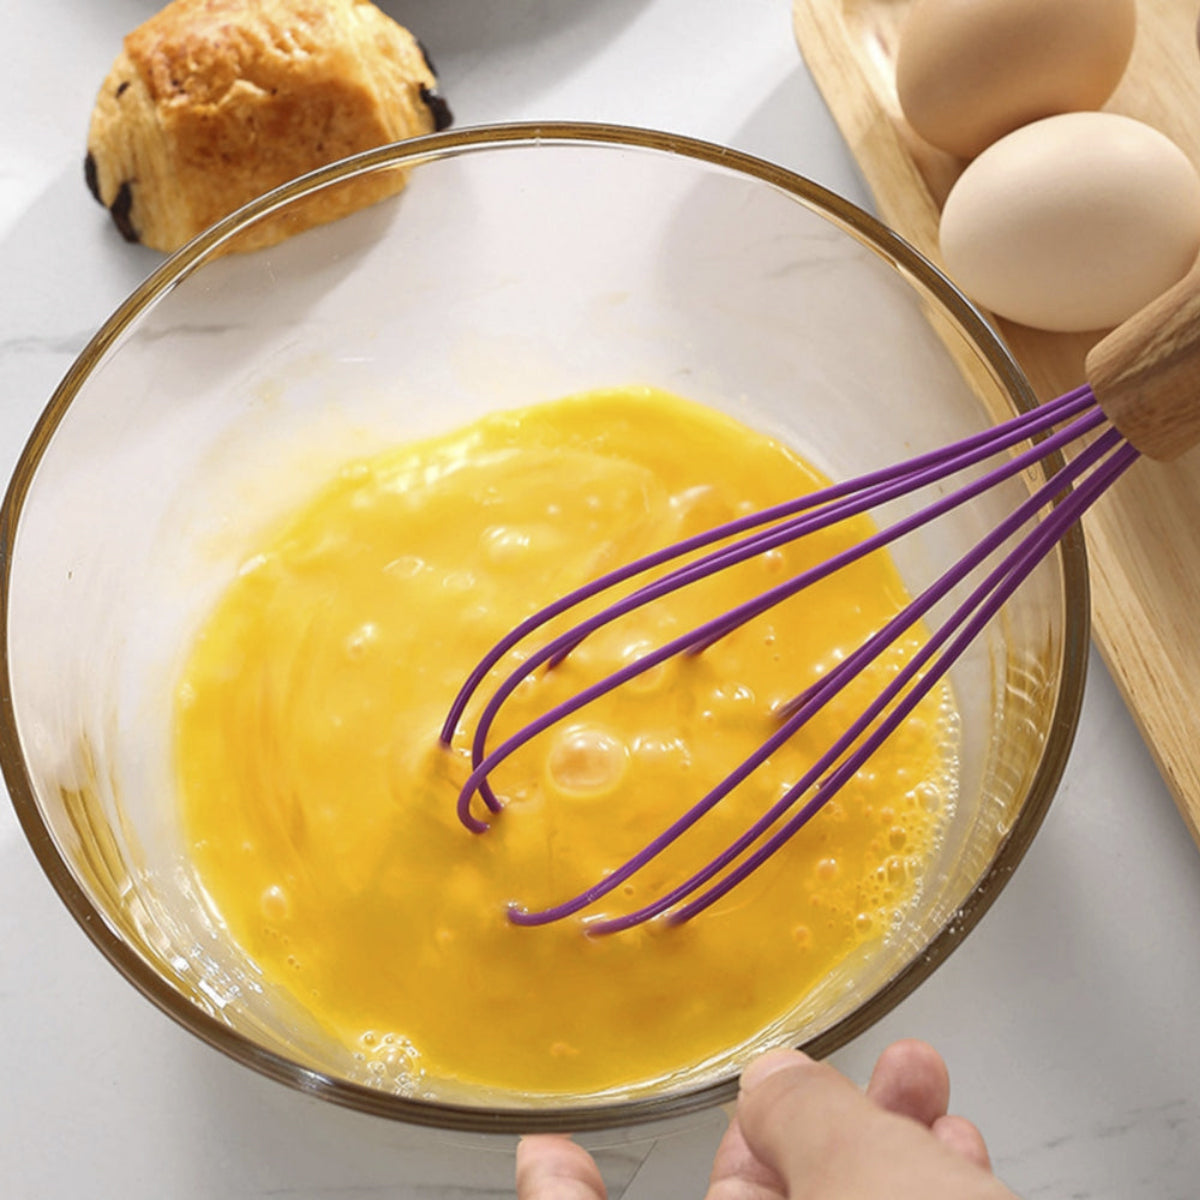 Wooden Handle Silicone Egg Whisk